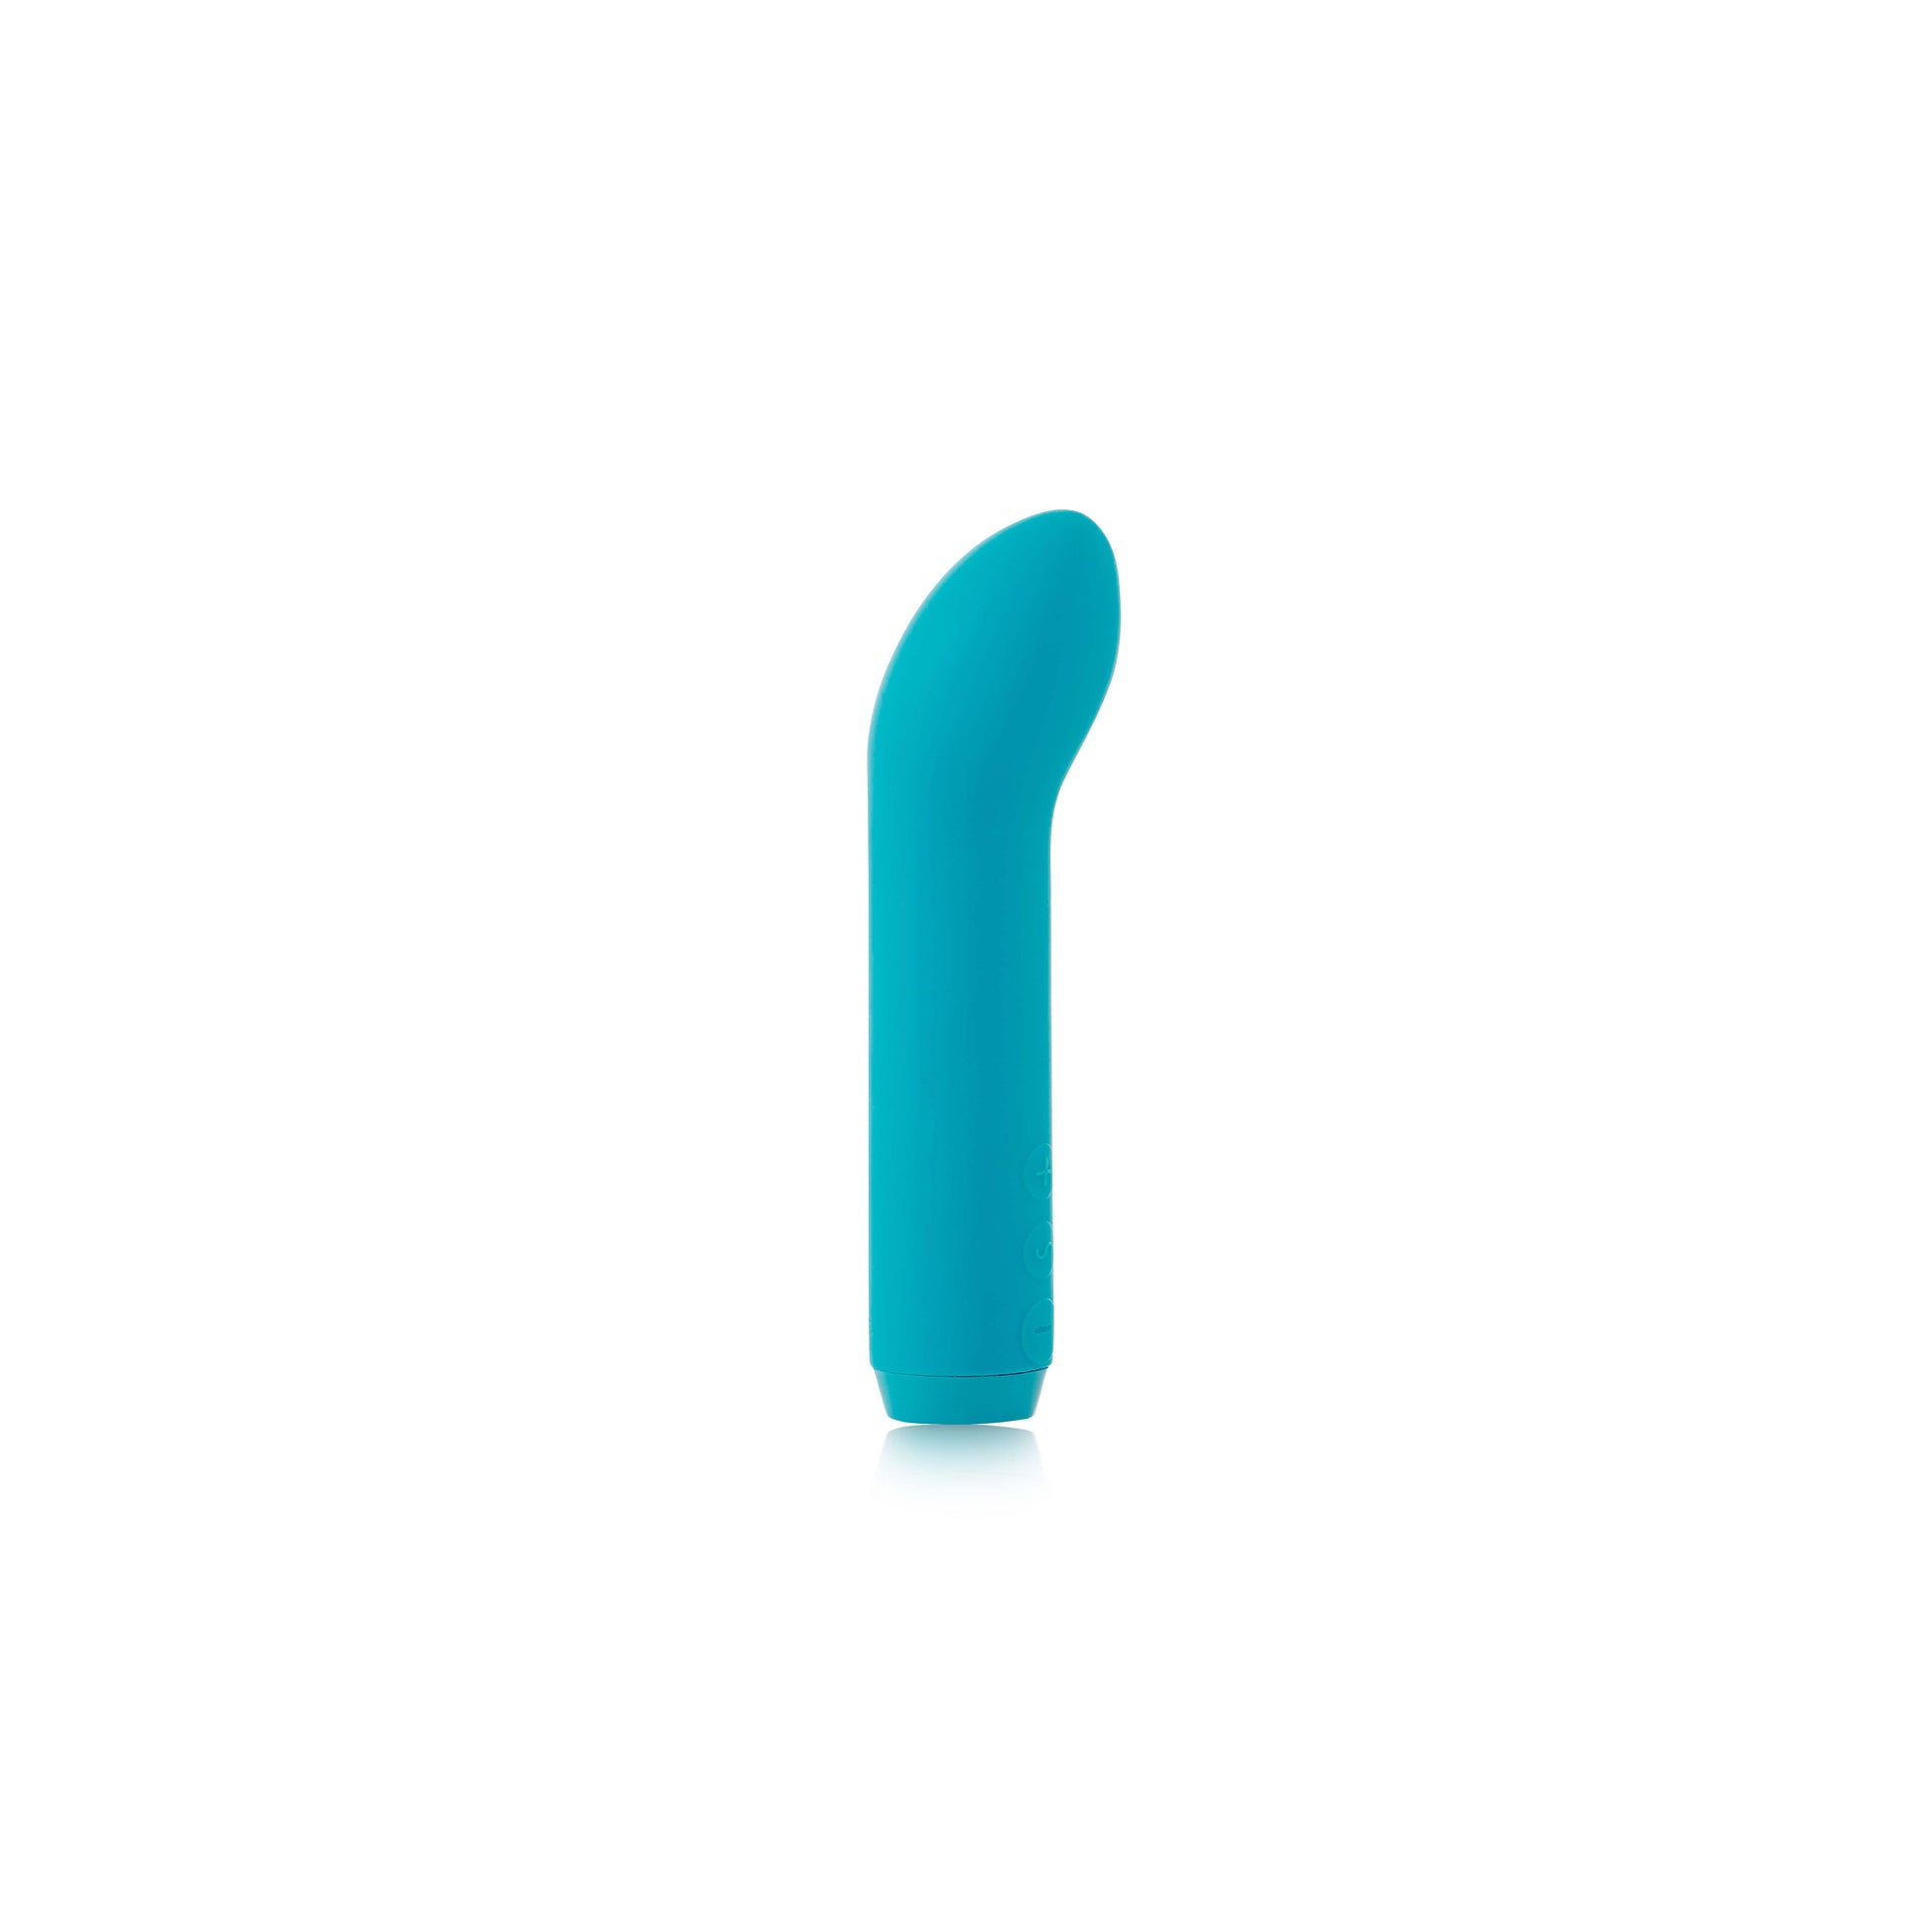 G Spot Bullet Vibrator in teal side view